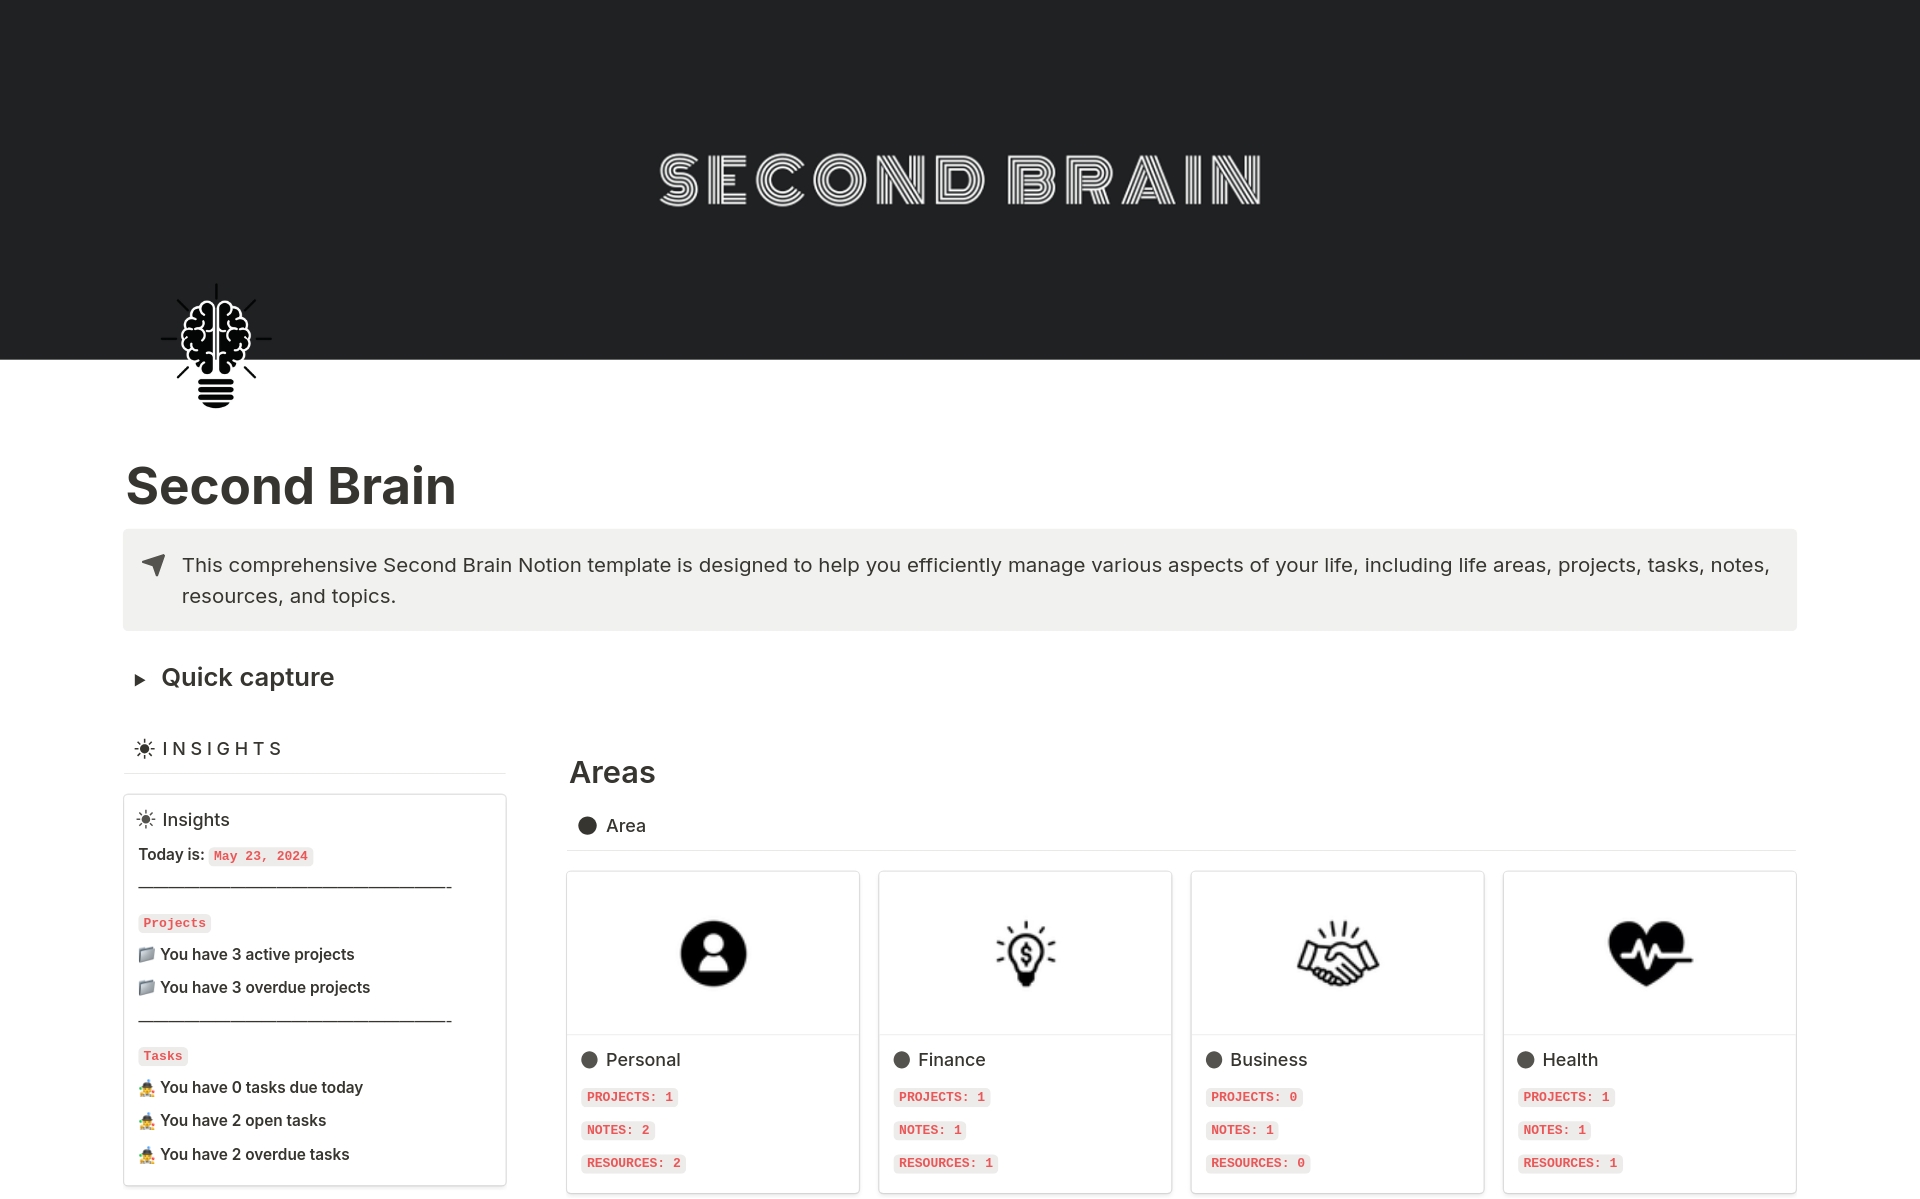 This comprehensive Second Brain Notion template is designed to help you efficiently manage various aspects of your life, including life areas, projects, tasks, notes, resources, and topics.